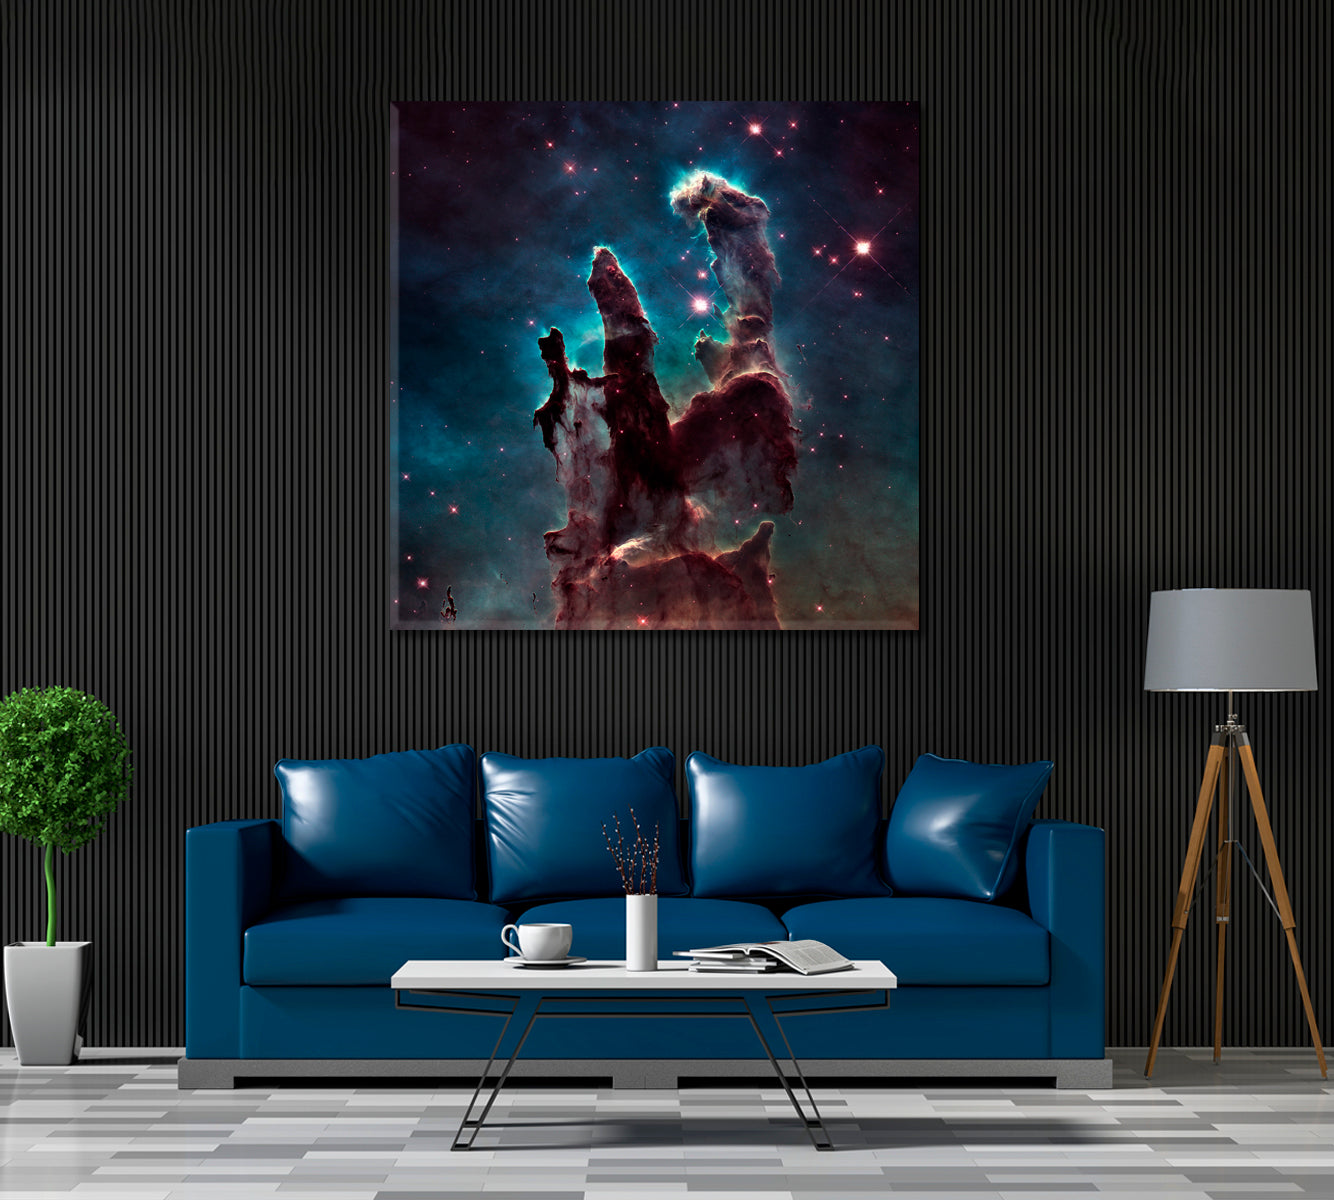 Pillars of Creation Canvas Print ArtLexy 1 Panel 12"x12" inches 